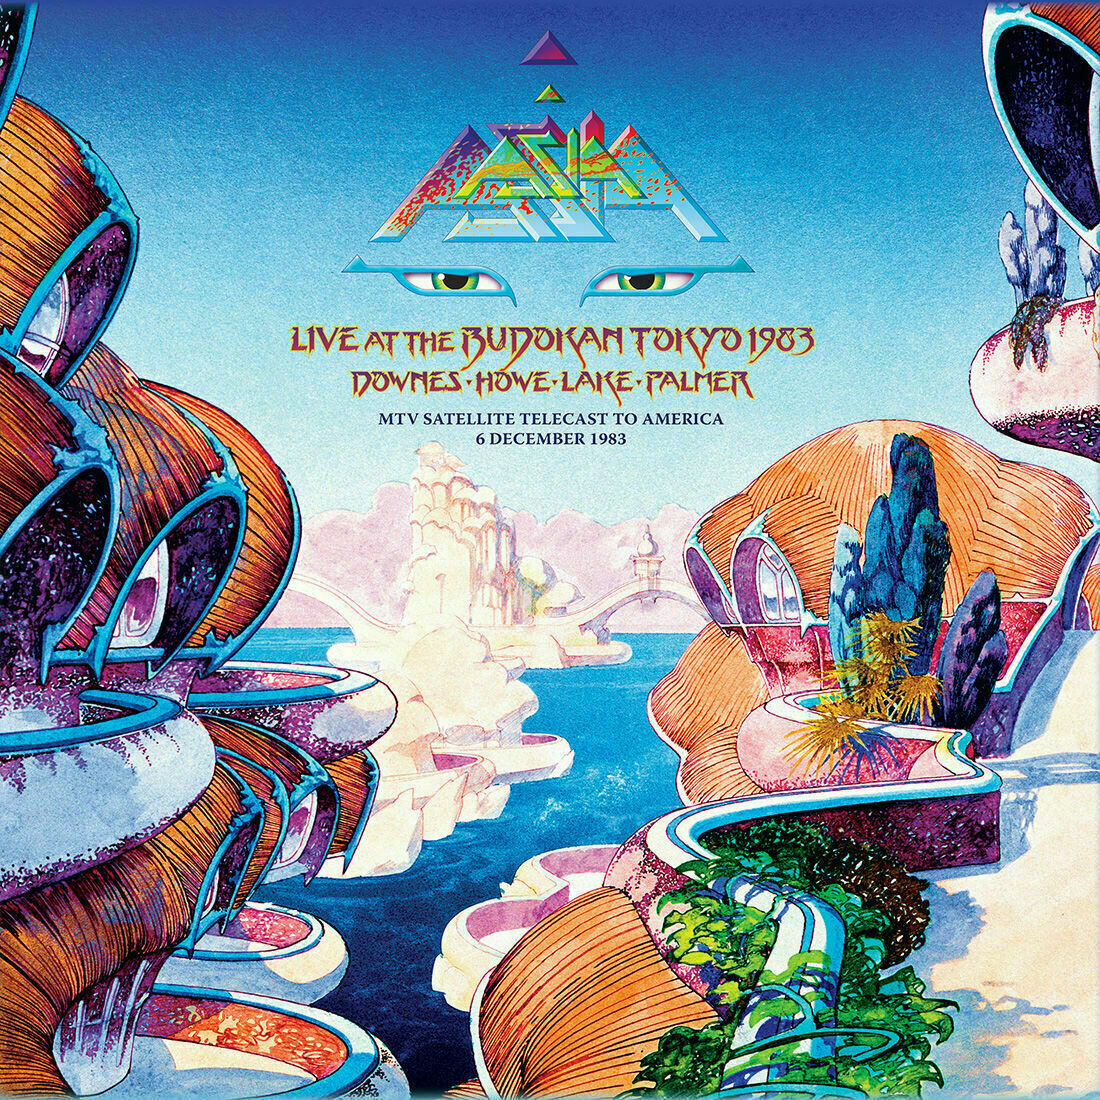 Asia - Asia In Asia - Live At The Budokan